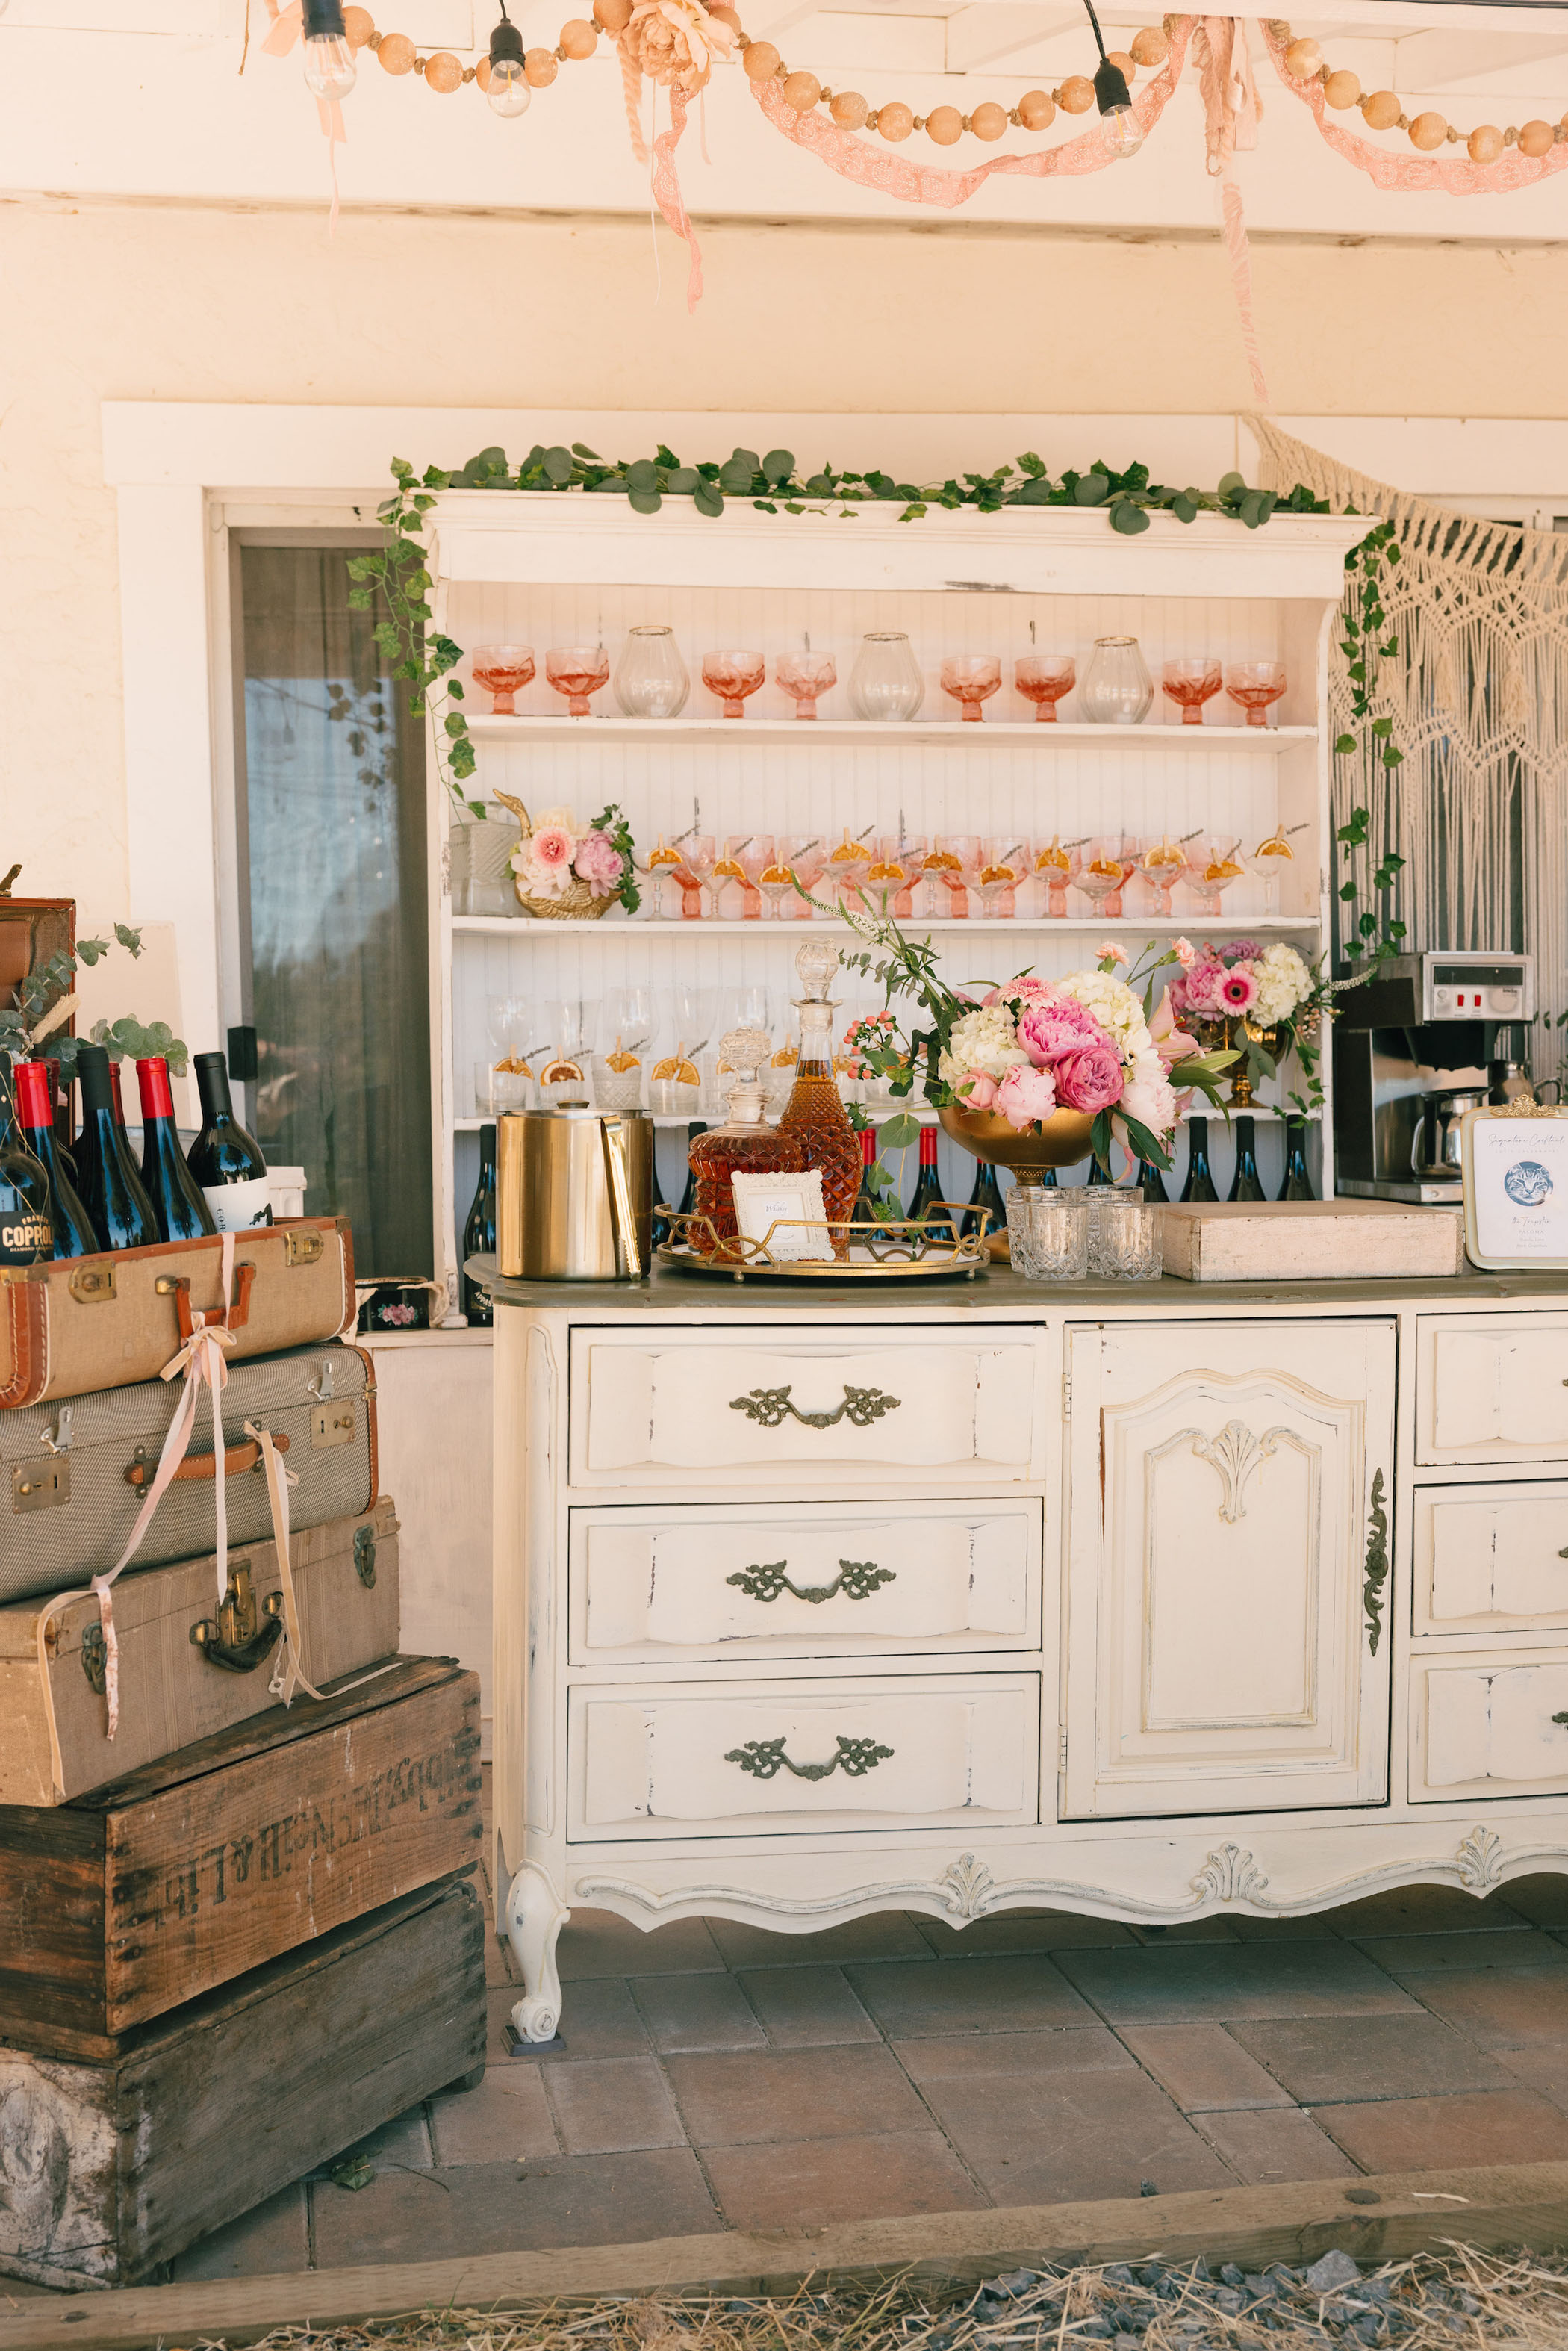 Vintage-Inspired Northern California Meadow Wedding with a Punk Rock Edge